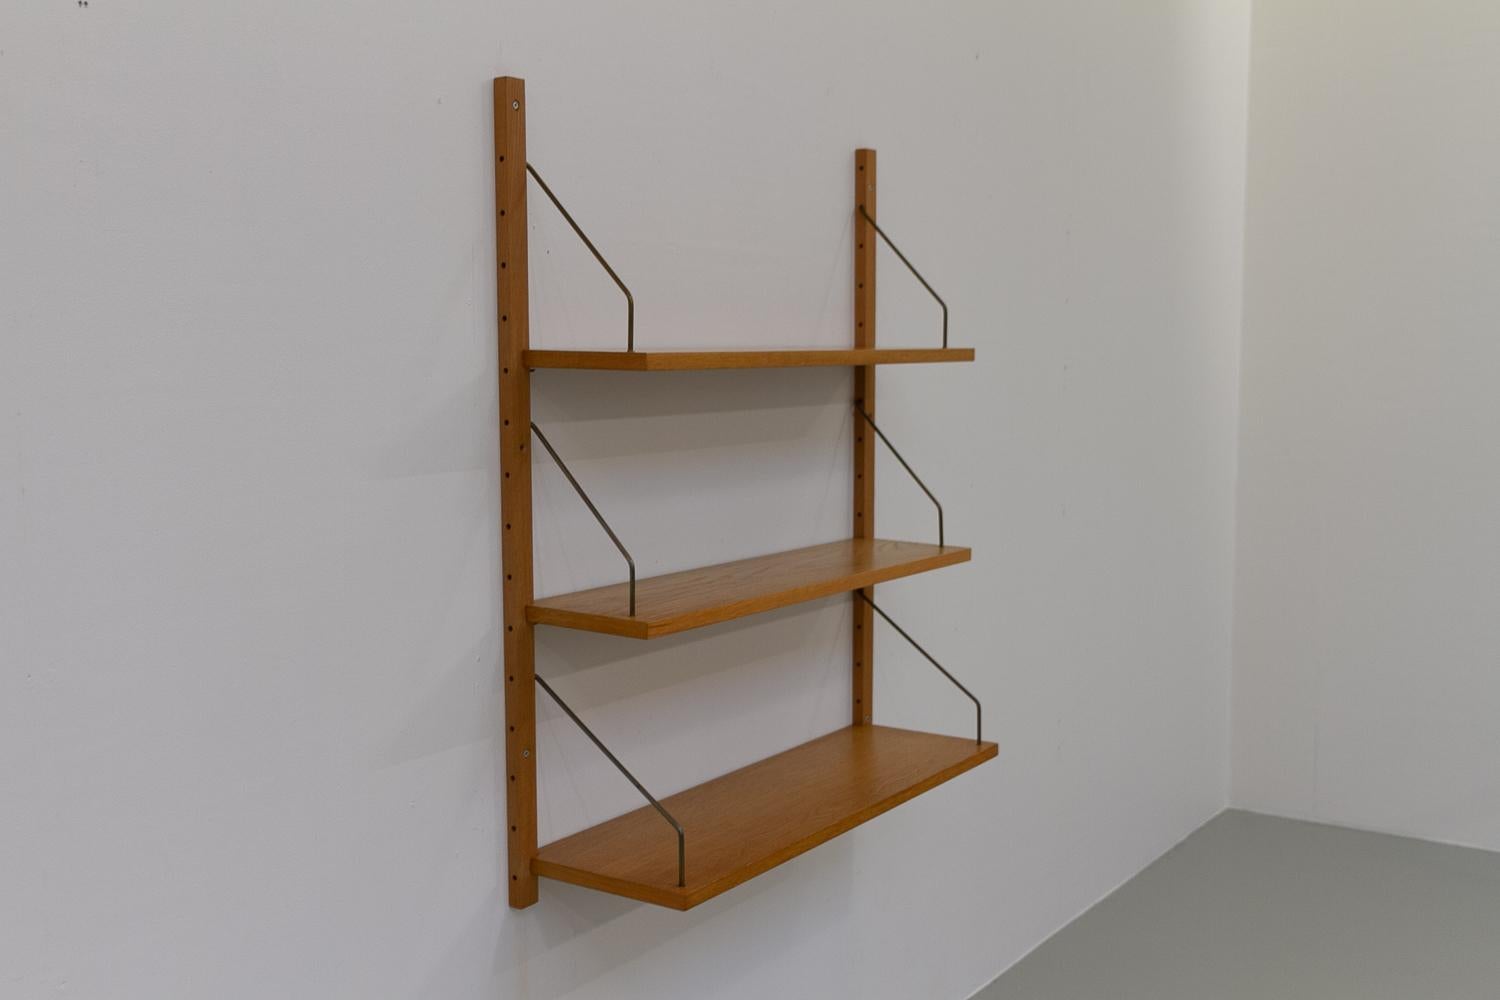 Vintage Danish Wall Mounted Oak Shelving System, 1960s.
Floating Scandinavian Modern 1 bay wall unit in oak with three shelves.
Each shelf is mounted with patinated brass brackets. In the style of Poul Cadovius. 

This set consists of:
2 Uprights in